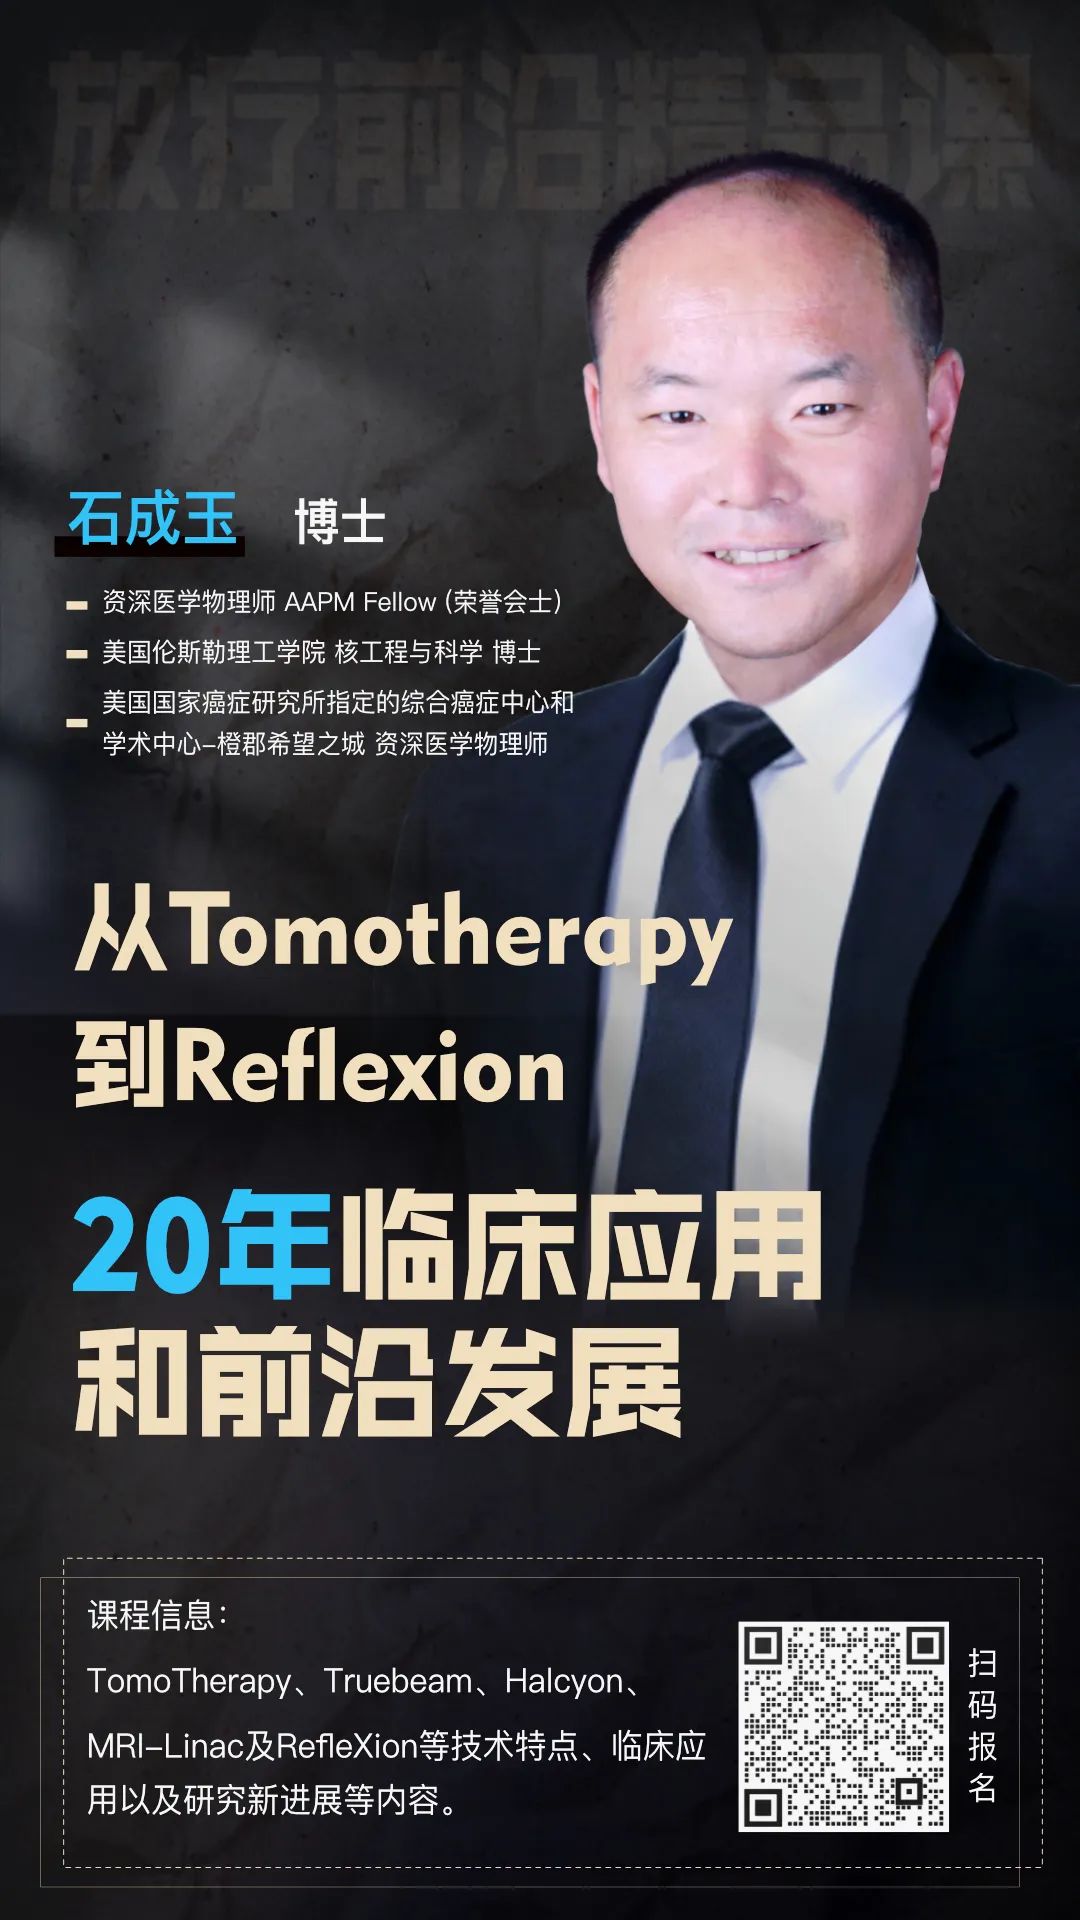 <font color="red">前沿技术</font>学习之旅：从Tomotherapy到 Reflexion20年临床应用和<font color="red">前沿</font>发展